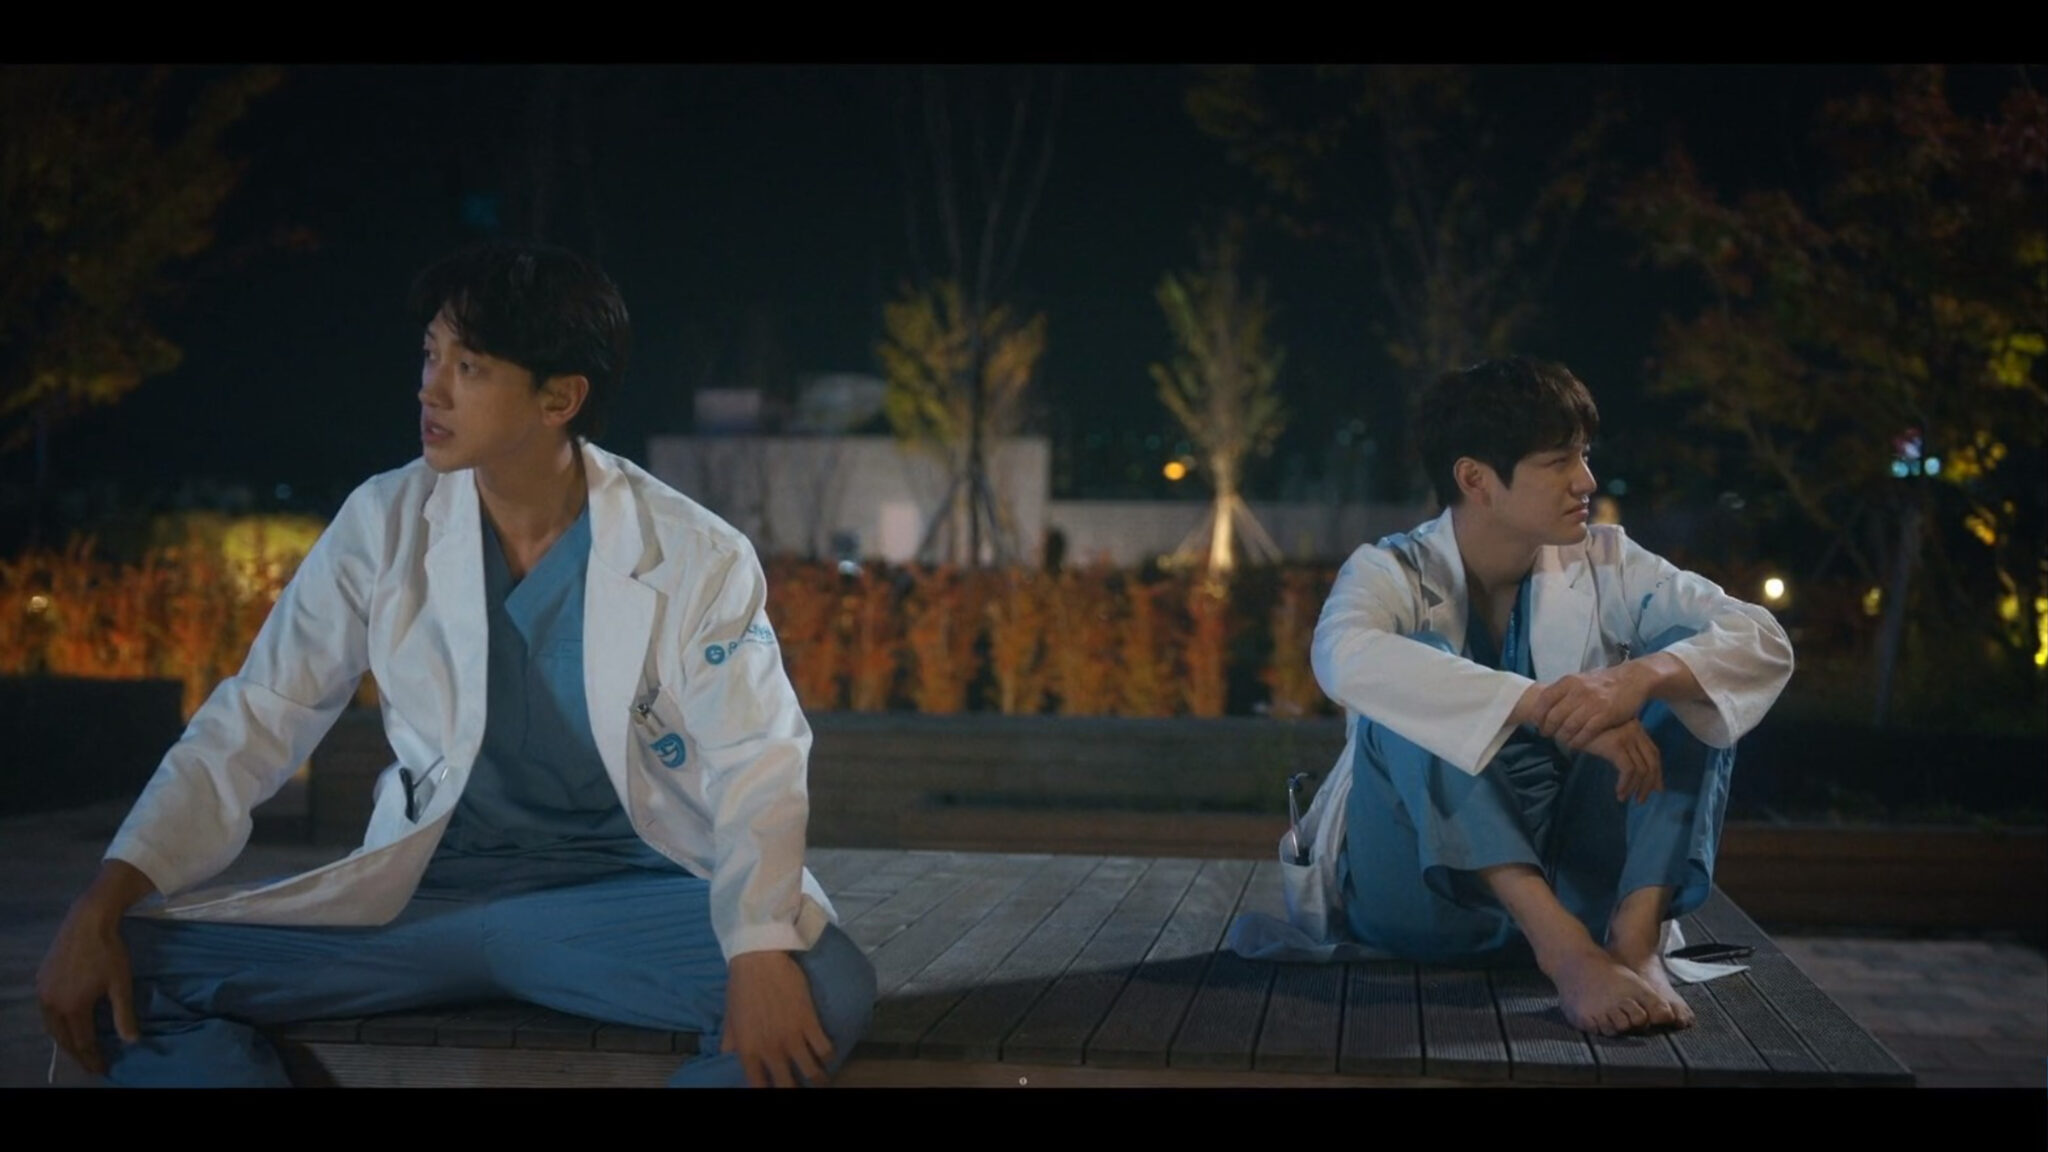 Ghost doctor ep 1 eng sub